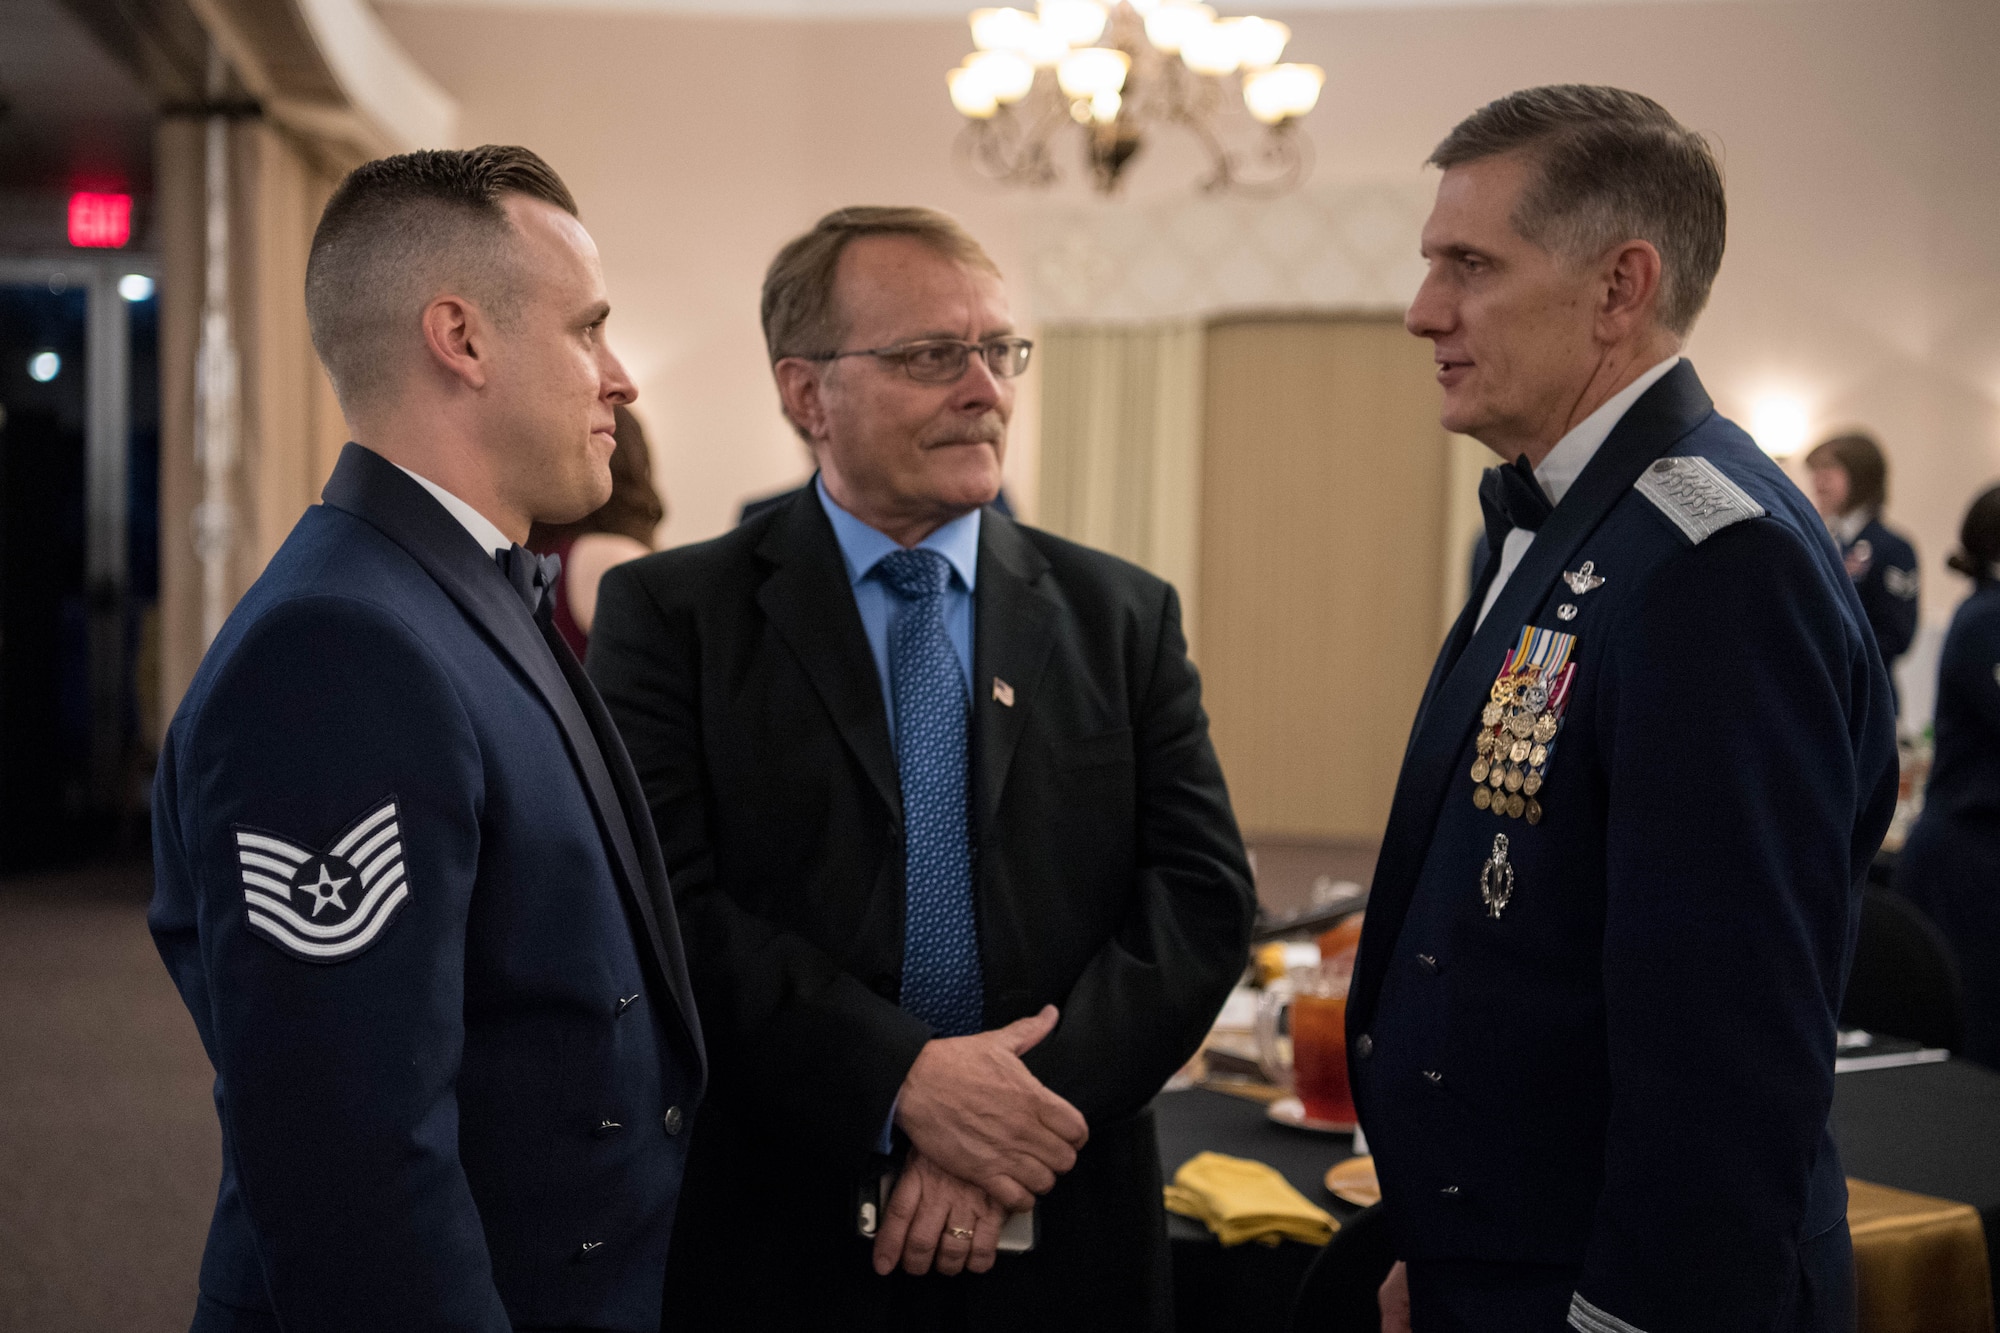 U.S. Air Force Tech. Sgt. Joshua D. White (left), 509th Force Support Squadron non-commissioned officer-in-charge of the base honor guard at Whiteman Air Force Base, Mo., and his father (middle) talk to Gen. Timothy Ray (right), Air Force Global Strike Command commander, at the AFGSC Outstanding Airmen of the Year award ceremony April 15, 2019, at Barksdale Air Force Base, La. The ceremony was hosted in honor of six Airmen who were selected as the most outstanding Airmen throughout AFGSC. (U.S. Air Force photo by Airman Jacob B. Wrightsman)